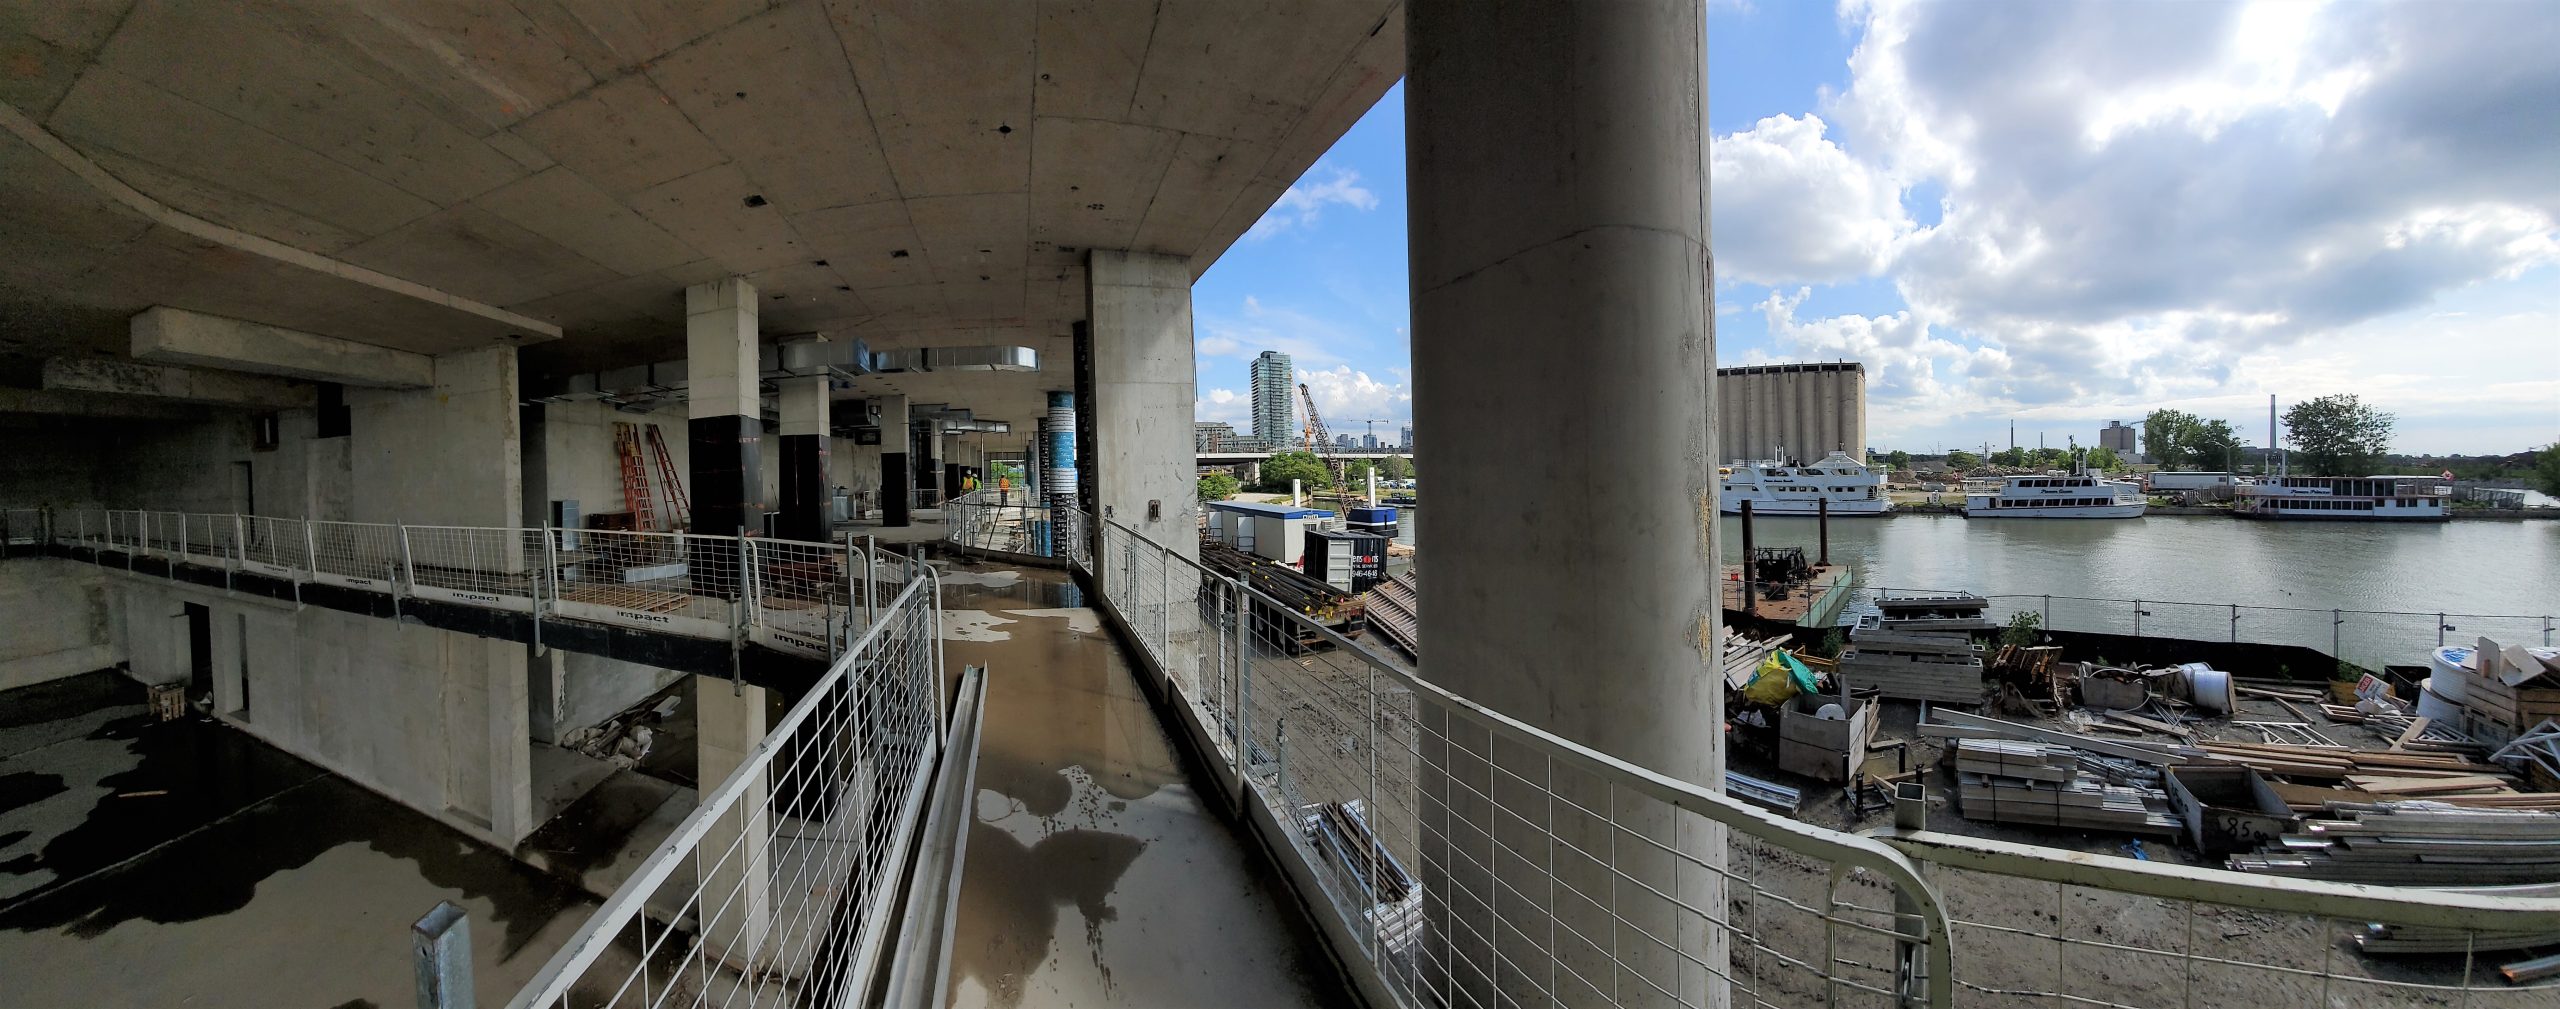 Interior of the new community recreation centre looking north from the walking track in the gym, showing the 2nd floor multi-purpose room and community kitchen at the left side, and the water’s edge promenade below at the right side.